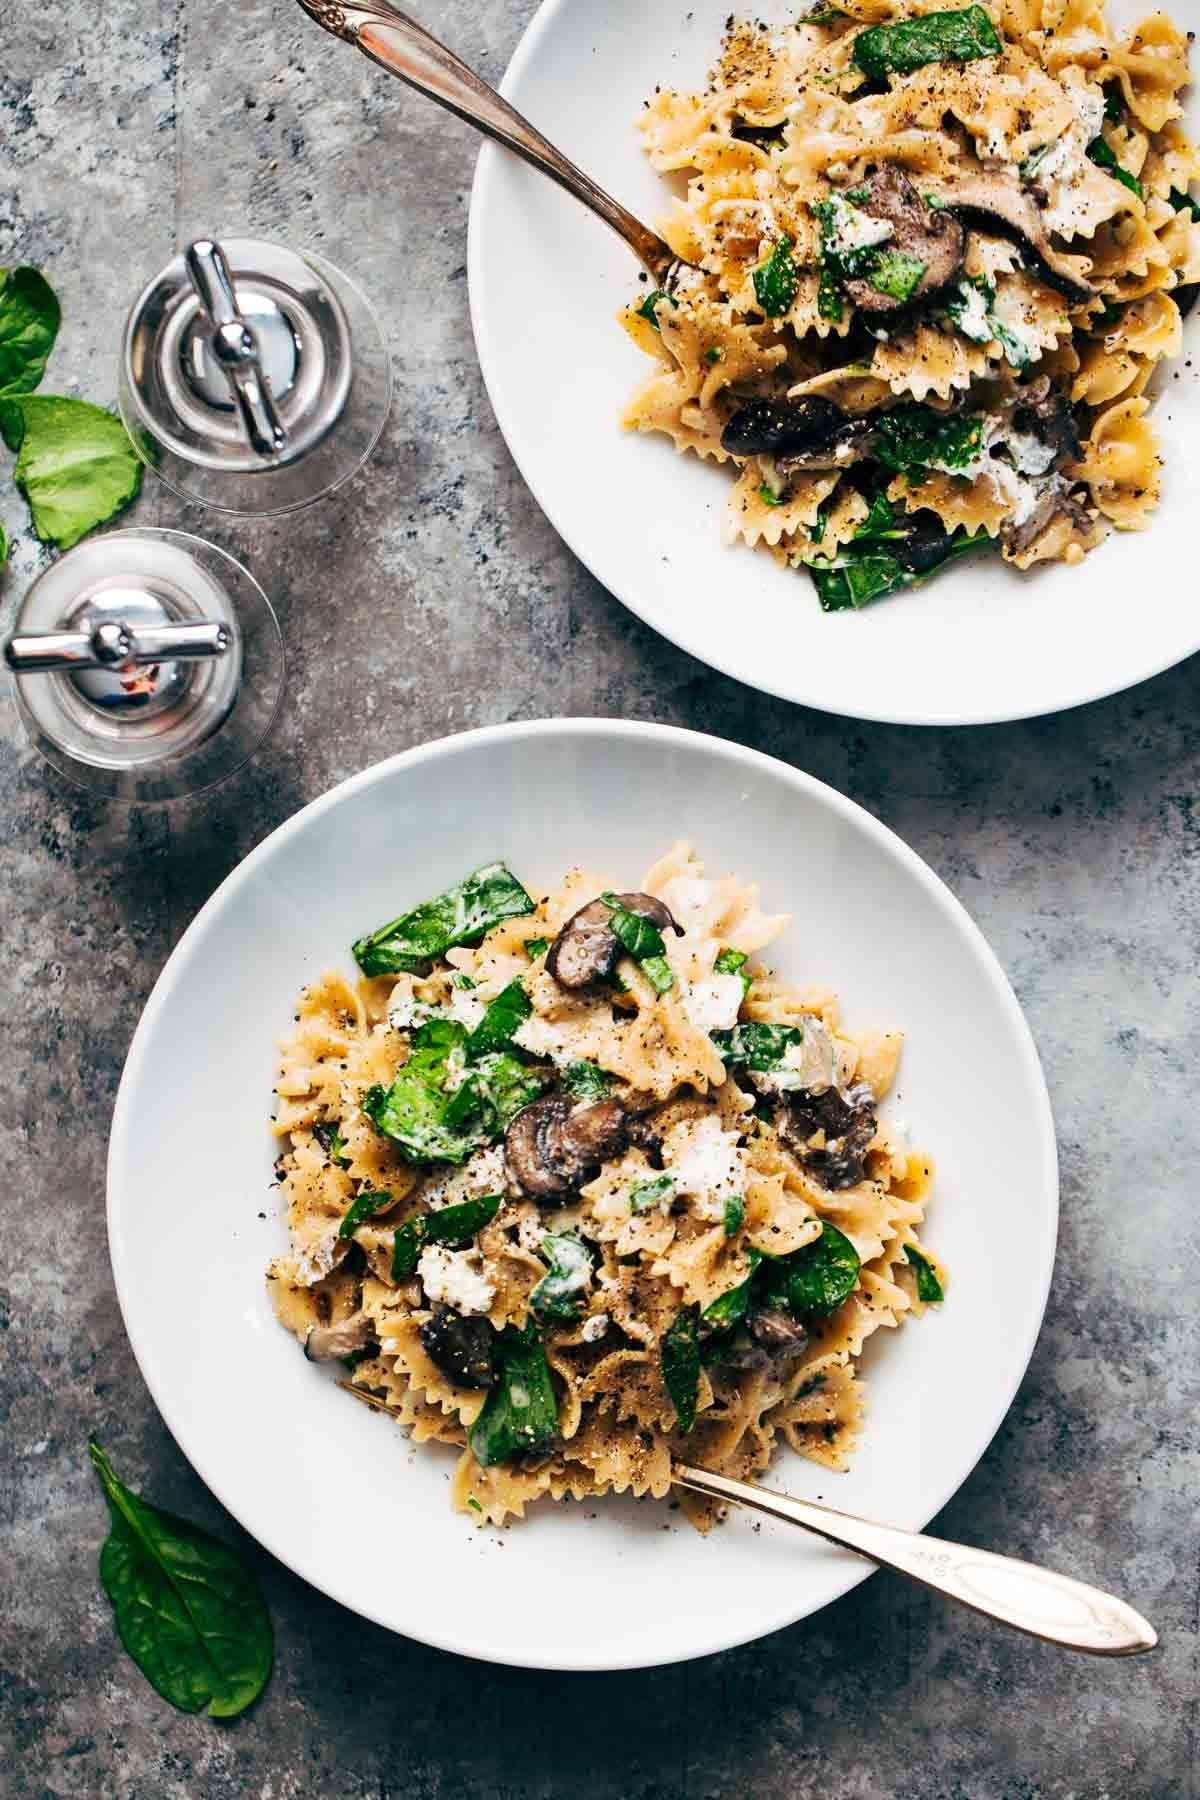 10 Amazing Vegetarian Dinner Ideas For Two date night mushroom pasta with goat cheese recipe pinch of yum 2023